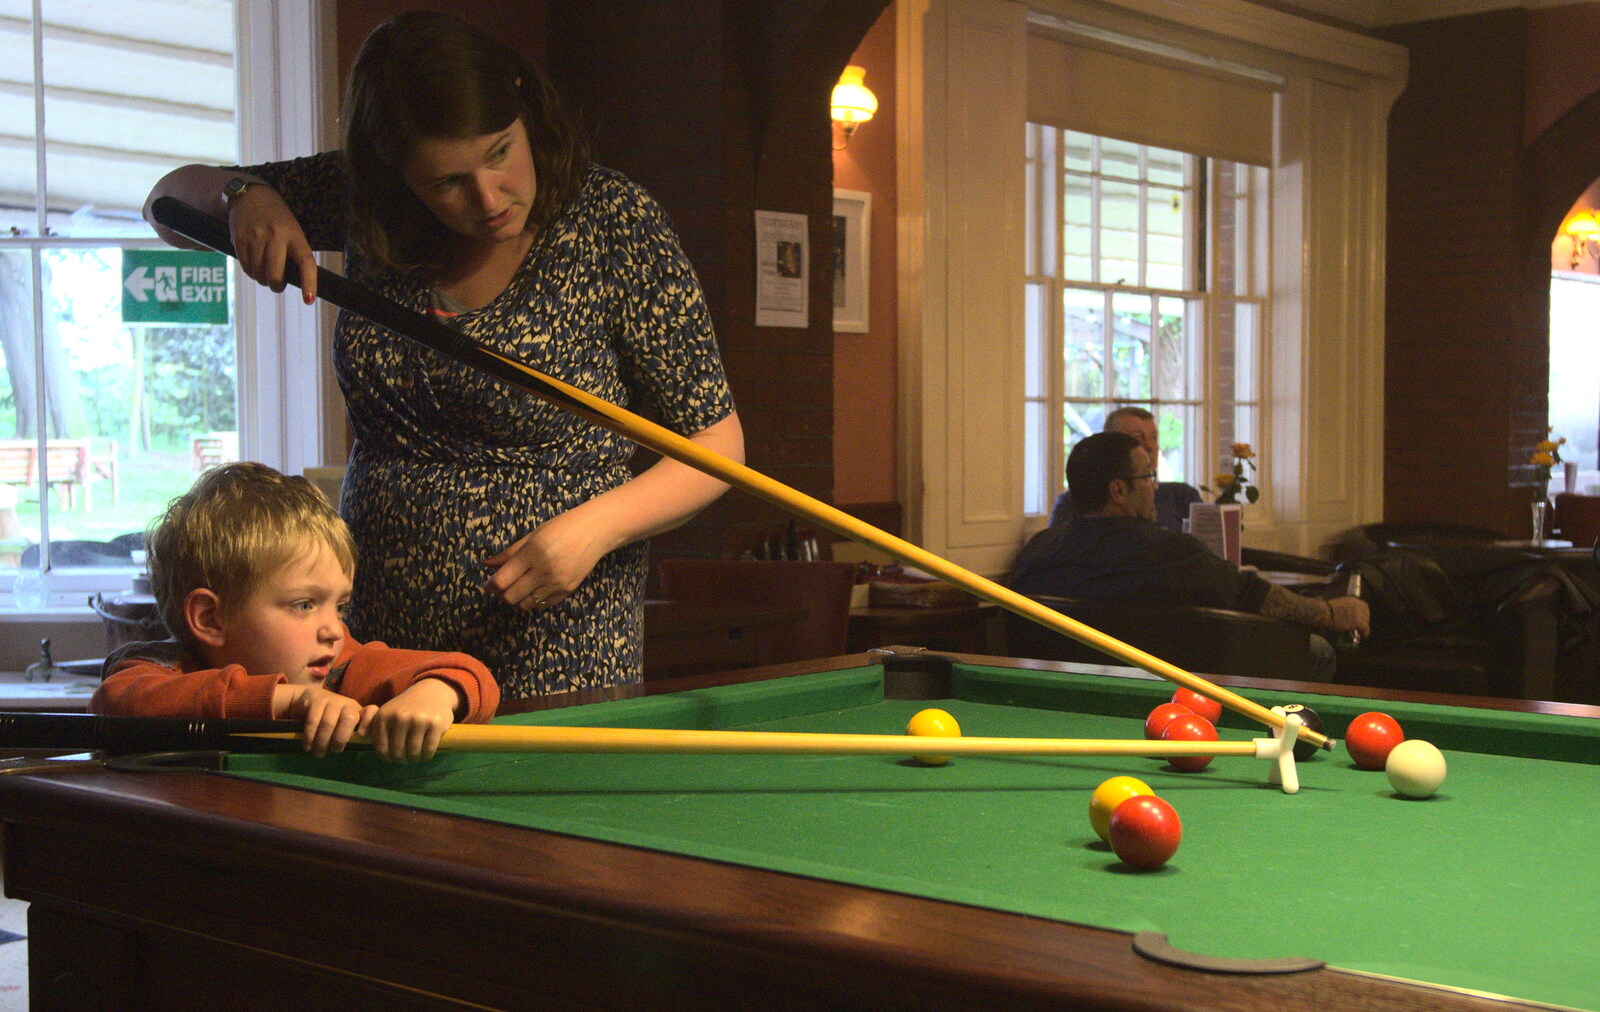 Fred helps out with a spot of pool from A Trip on the Norfolk Broads, Wroxham, Norfolk - 25th May 2013